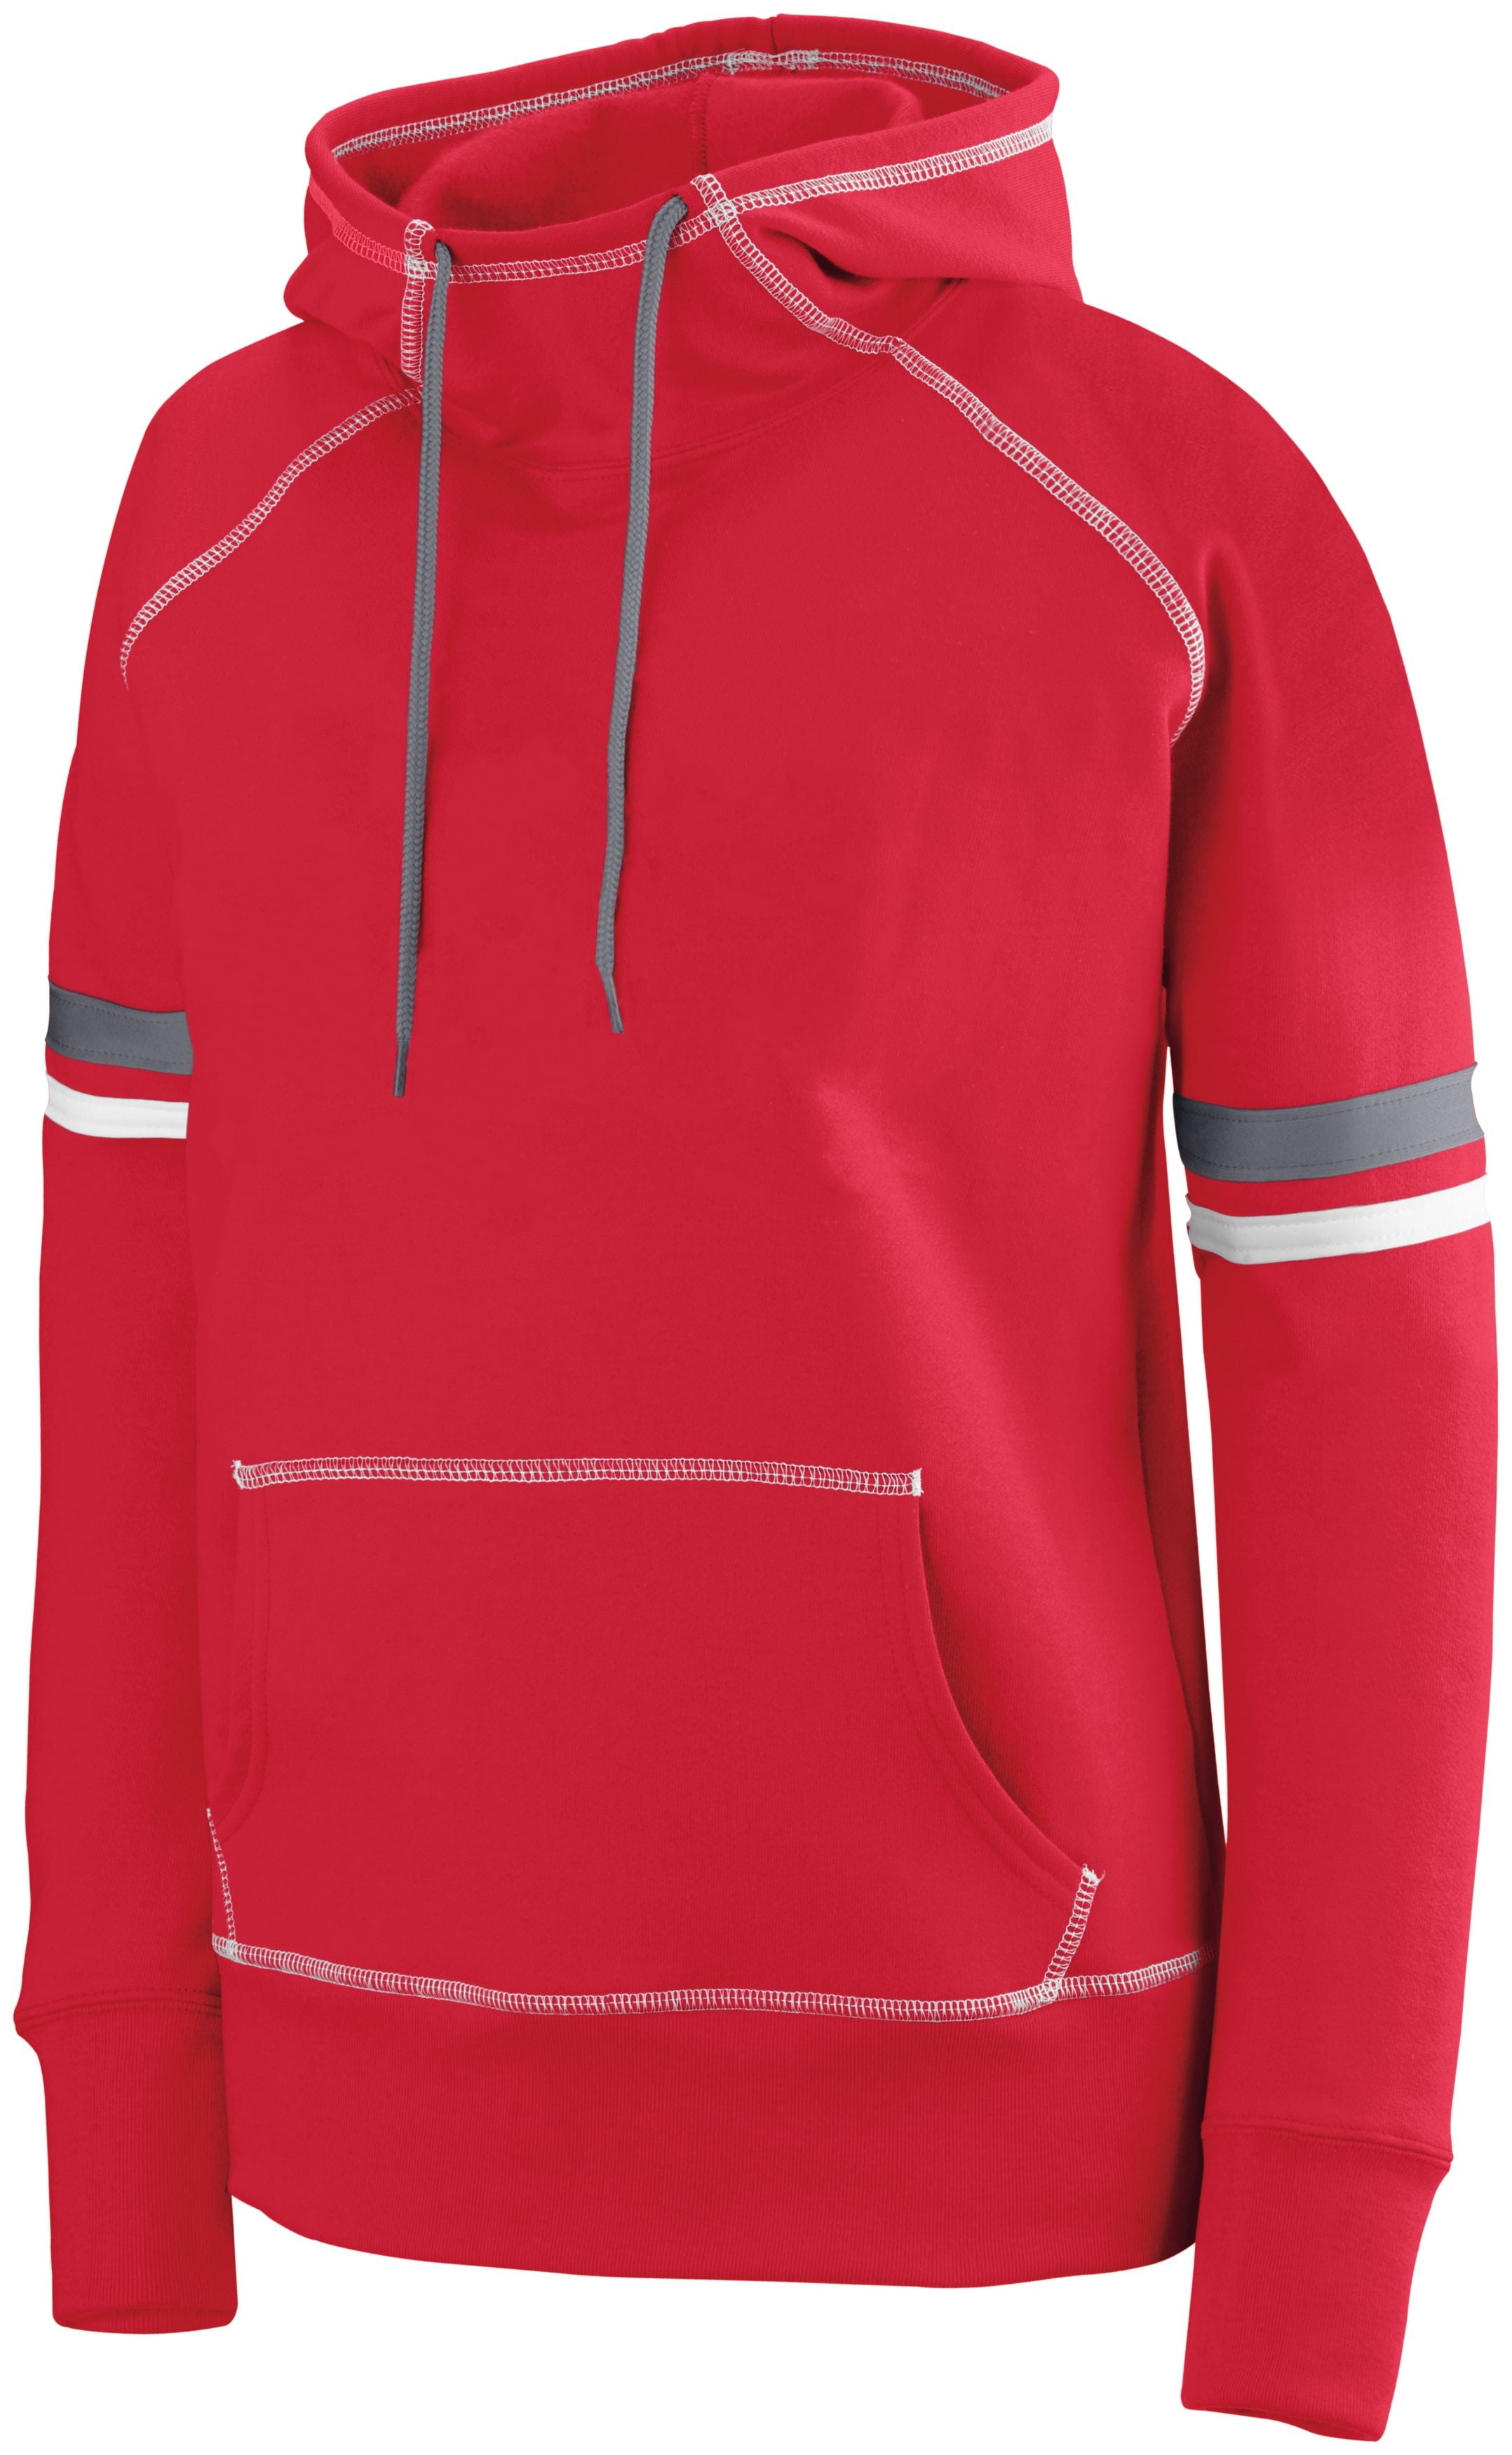 Augusta Sportswear Girls Spry Hoodie in Red/White/Graphite  -Part of the Girls, Hoodies, Augusta-Products, Girls-Hoodie product lines at KanaleyCreations.com